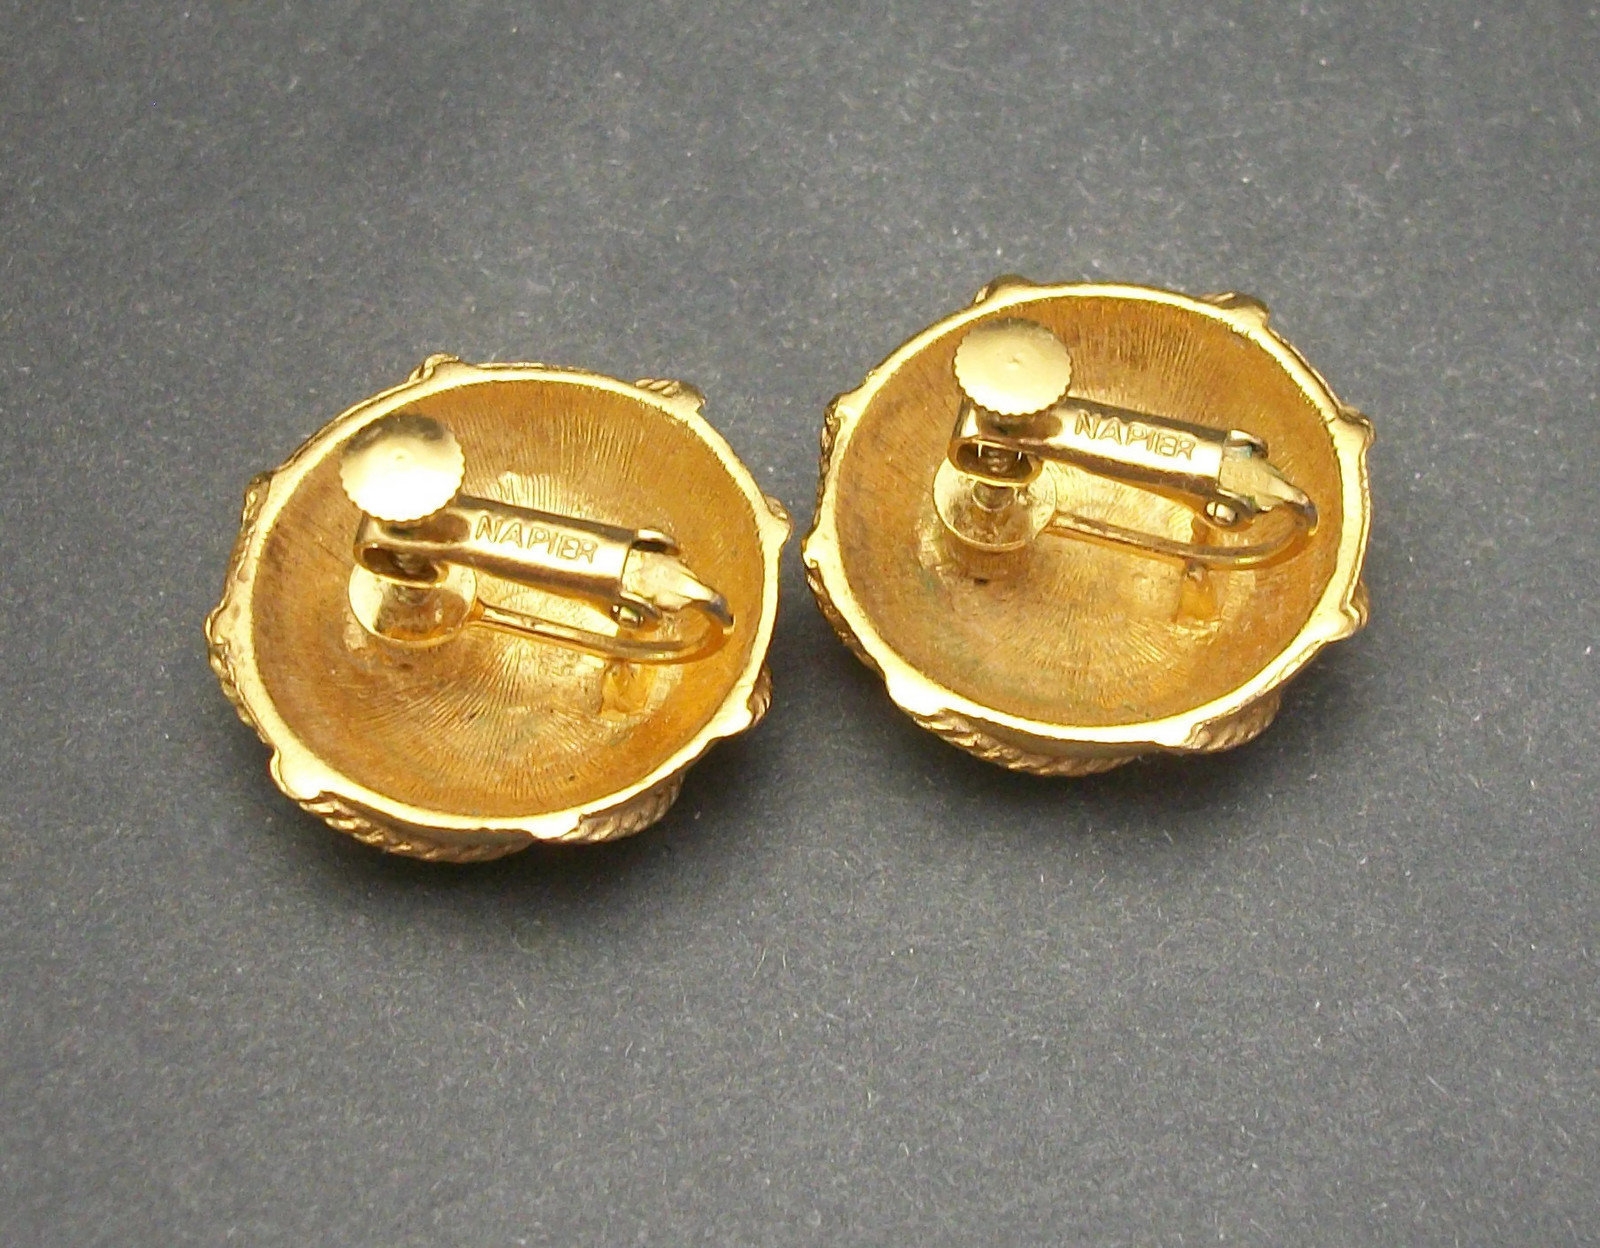 Vintage Napier Gold Clip on Earrings with Adjustable Screws 1 inch ...